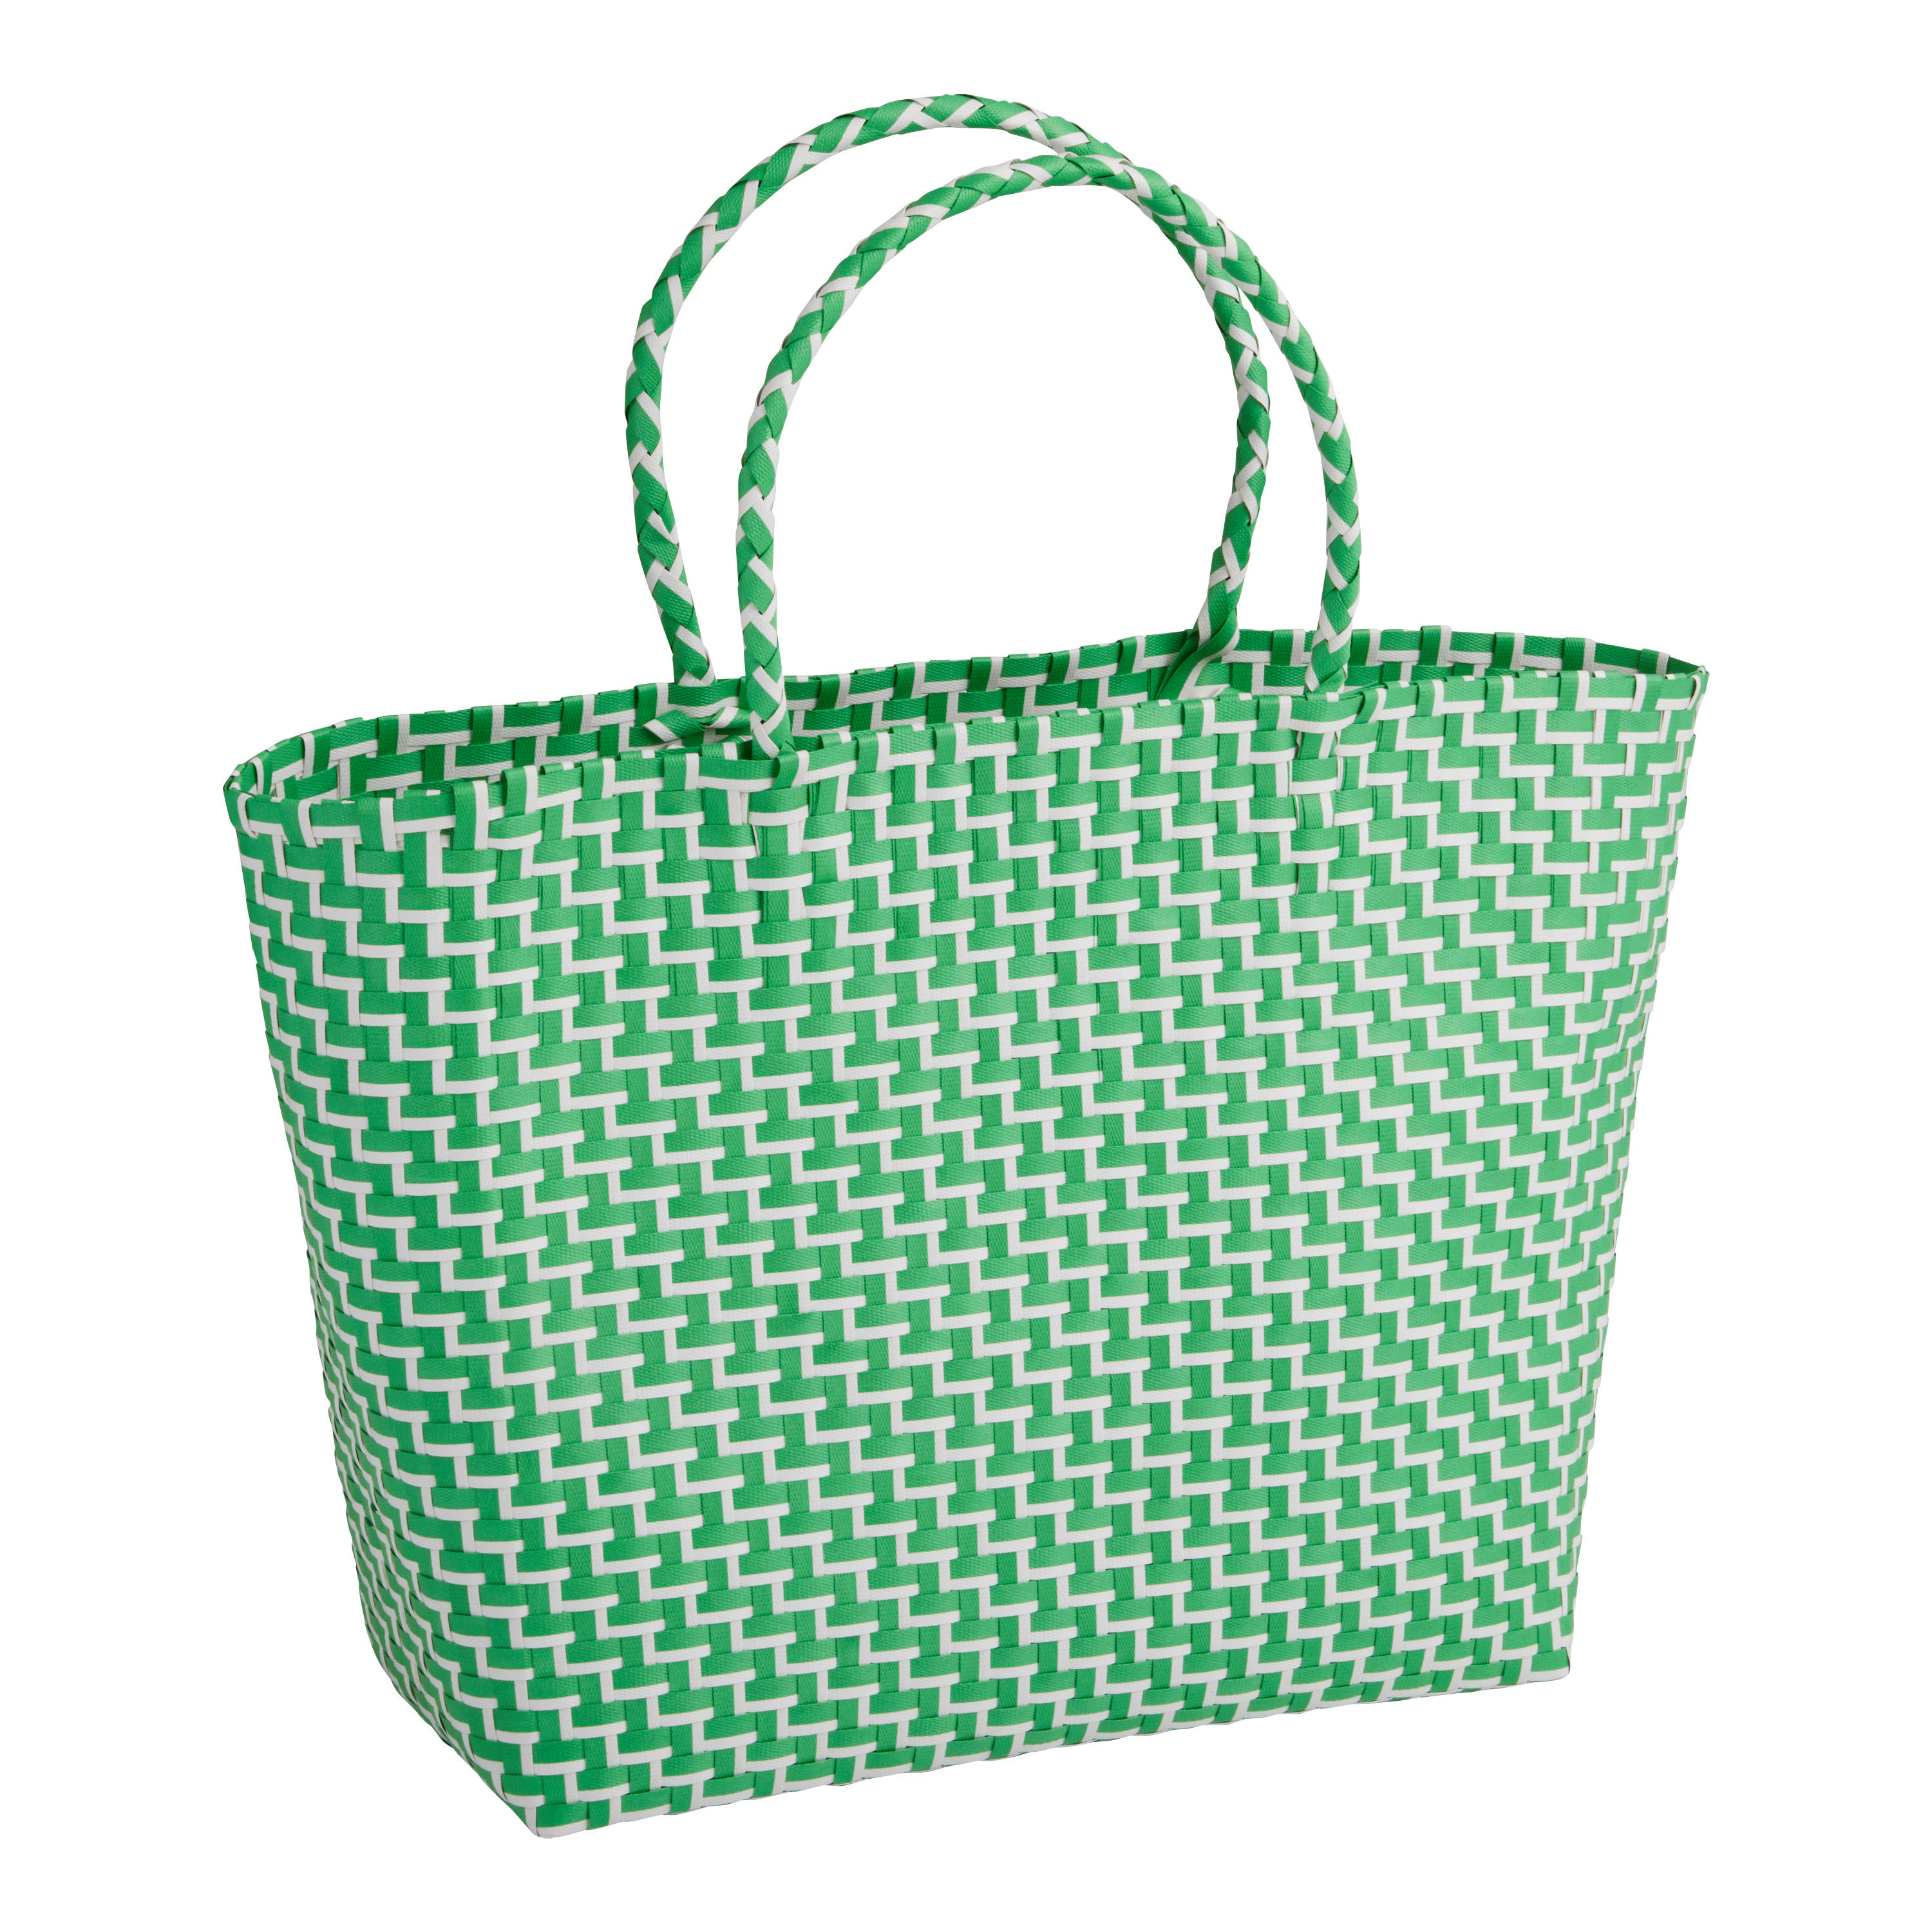 Green And White Woven Straw Tote Bag - World Market